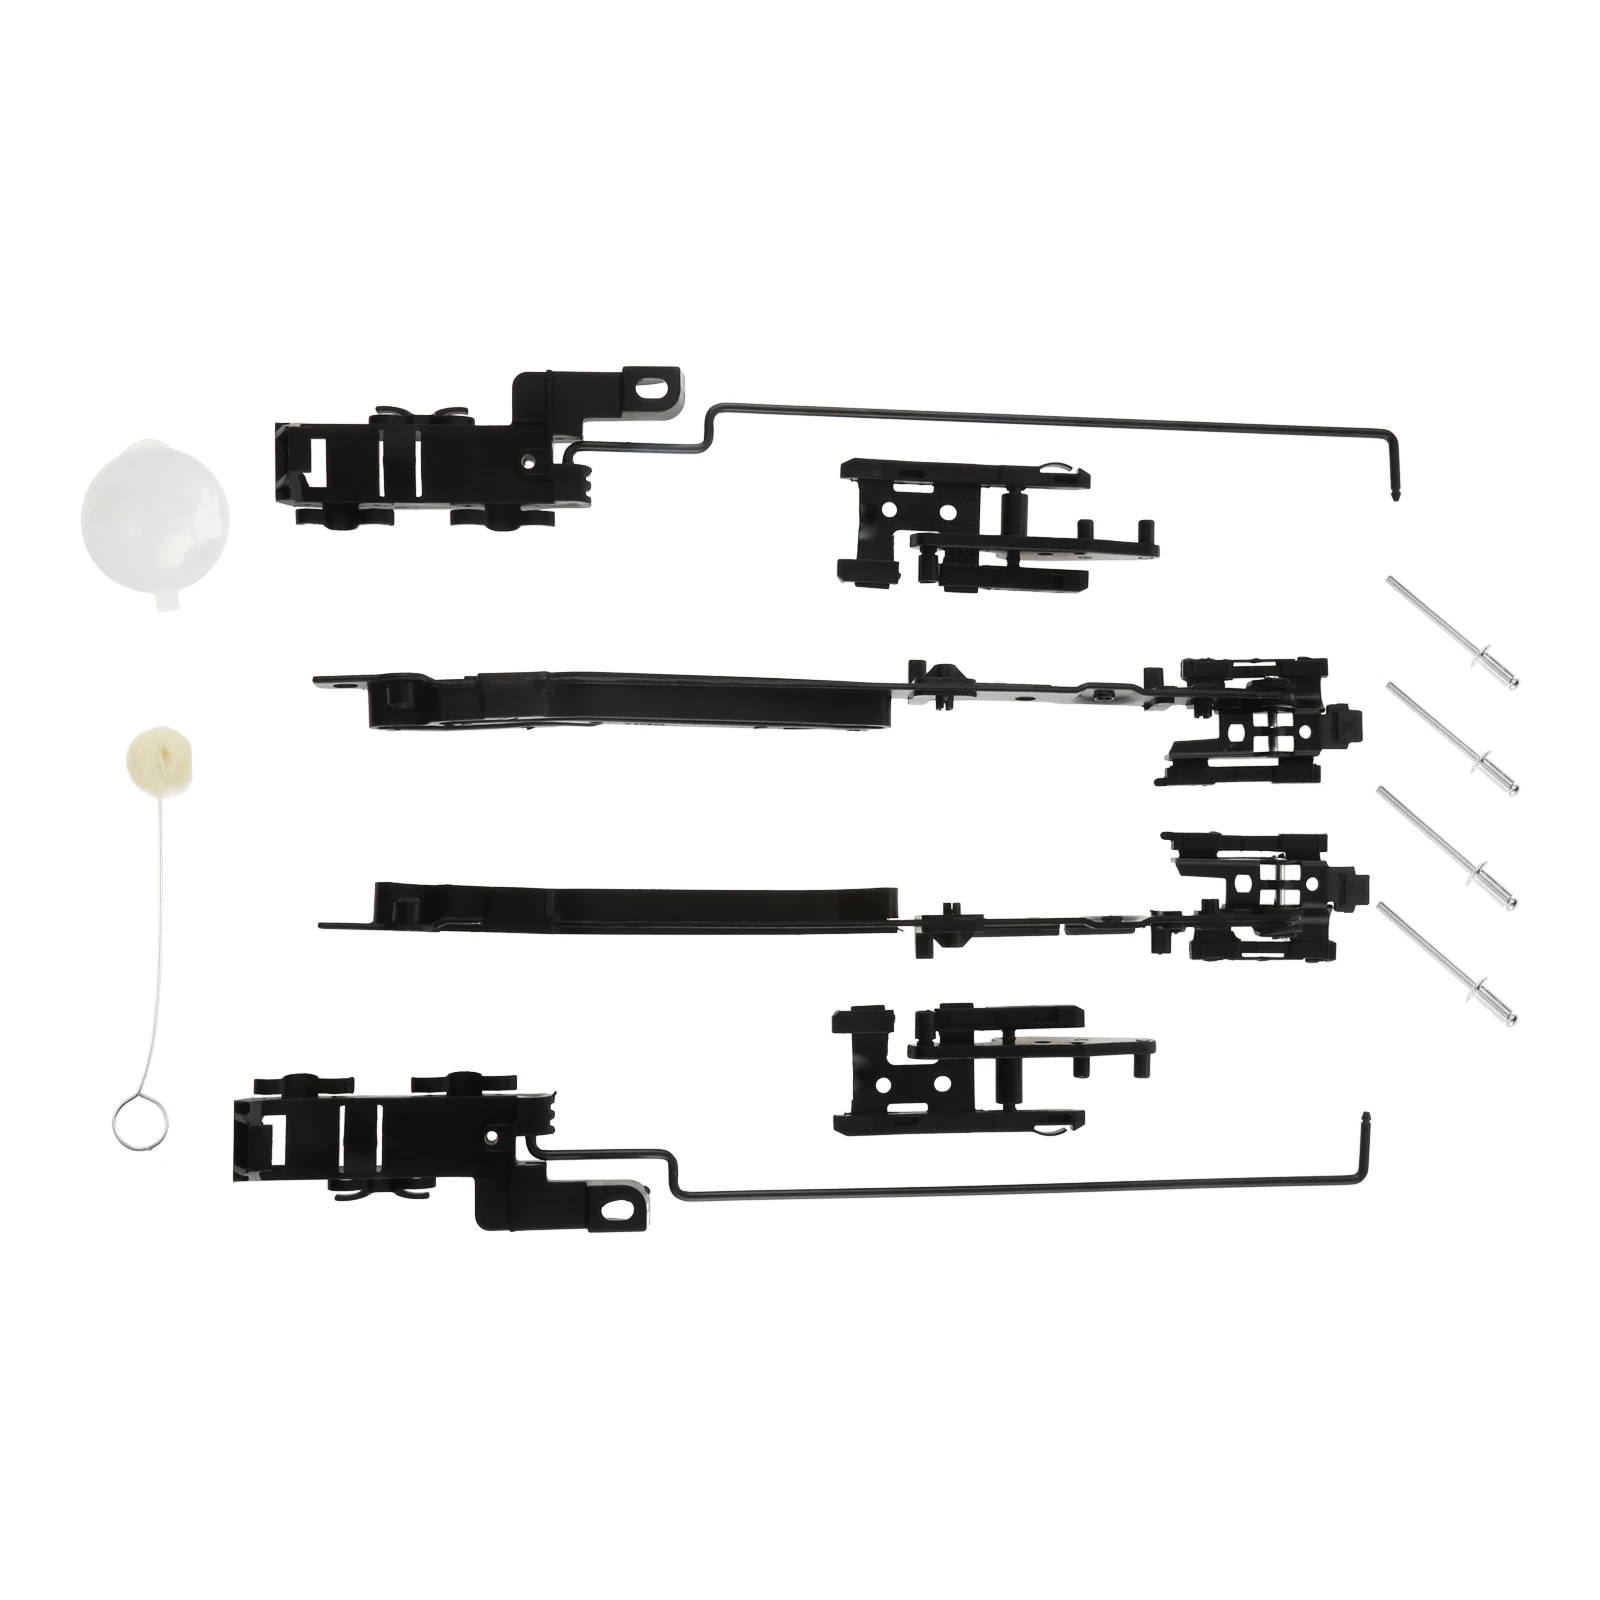 Sunroof Repair Kits Lift Arms Cam Bracket for Ford Expedition F150 F250 ... - $37.58